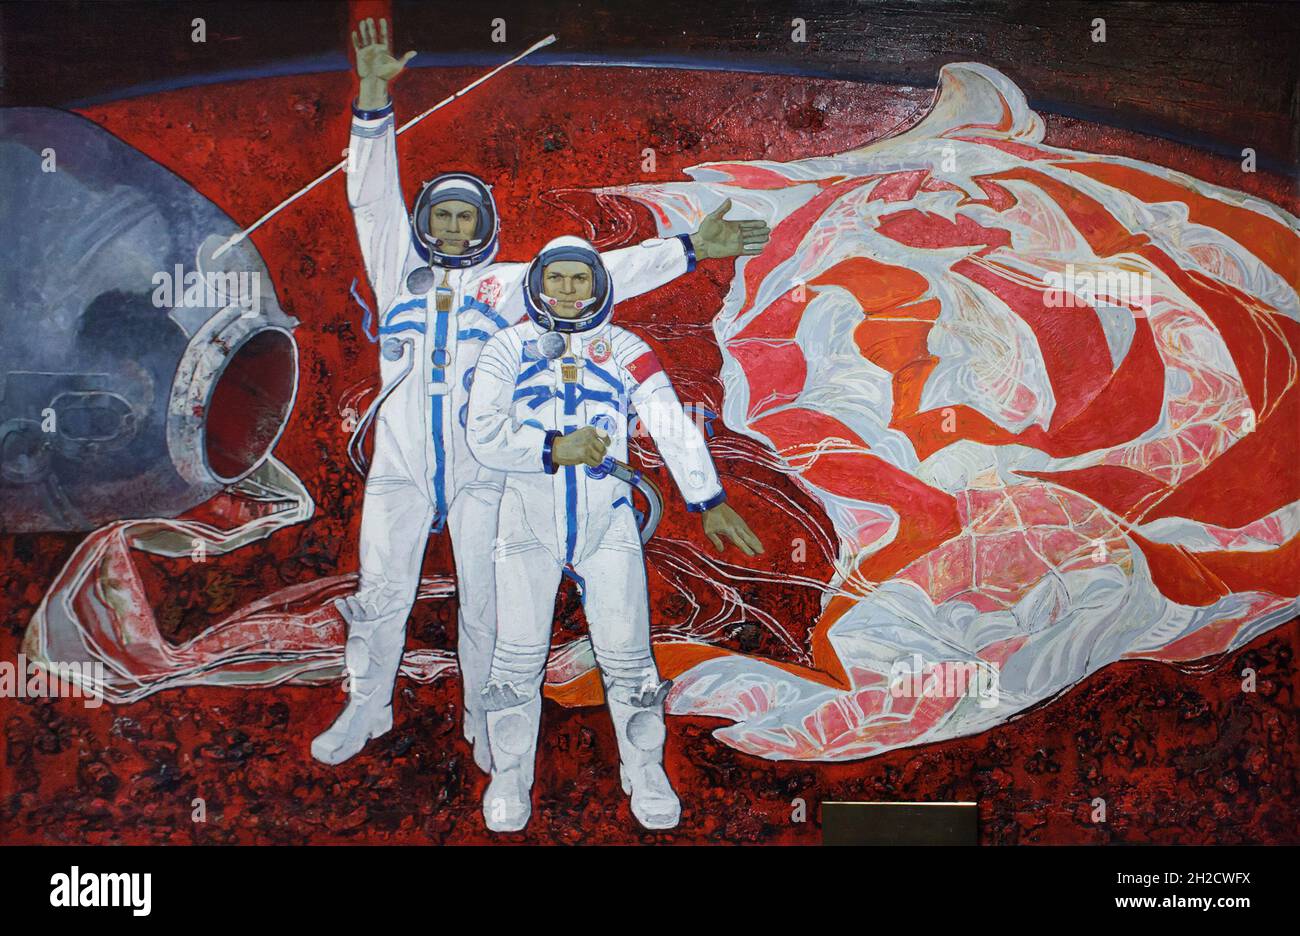 Czechoslovak cosmonaut Vladimír Remek (L) and Soviet cosmonaut Alexei Gubarev (R) depicted in the painting by Soviet cosmonaut Alexei Leonov (1981) on display in the National Museum (Národní muzeum) in Prague, Czech Republic. Vladimír Remek and Alexei Gubarev were the crew members of the 1978 Soviet crewed mission 'Soyuz 28'. The cosmonauts are depicted shortly after the landing in the Kazakh Steppe near the town of Arkalyk in Kazakhstan on 10 March 1978. The painting is on view at the new permanent exhibition of the National Museum devoted to the History of the 20th century. Stock Photo